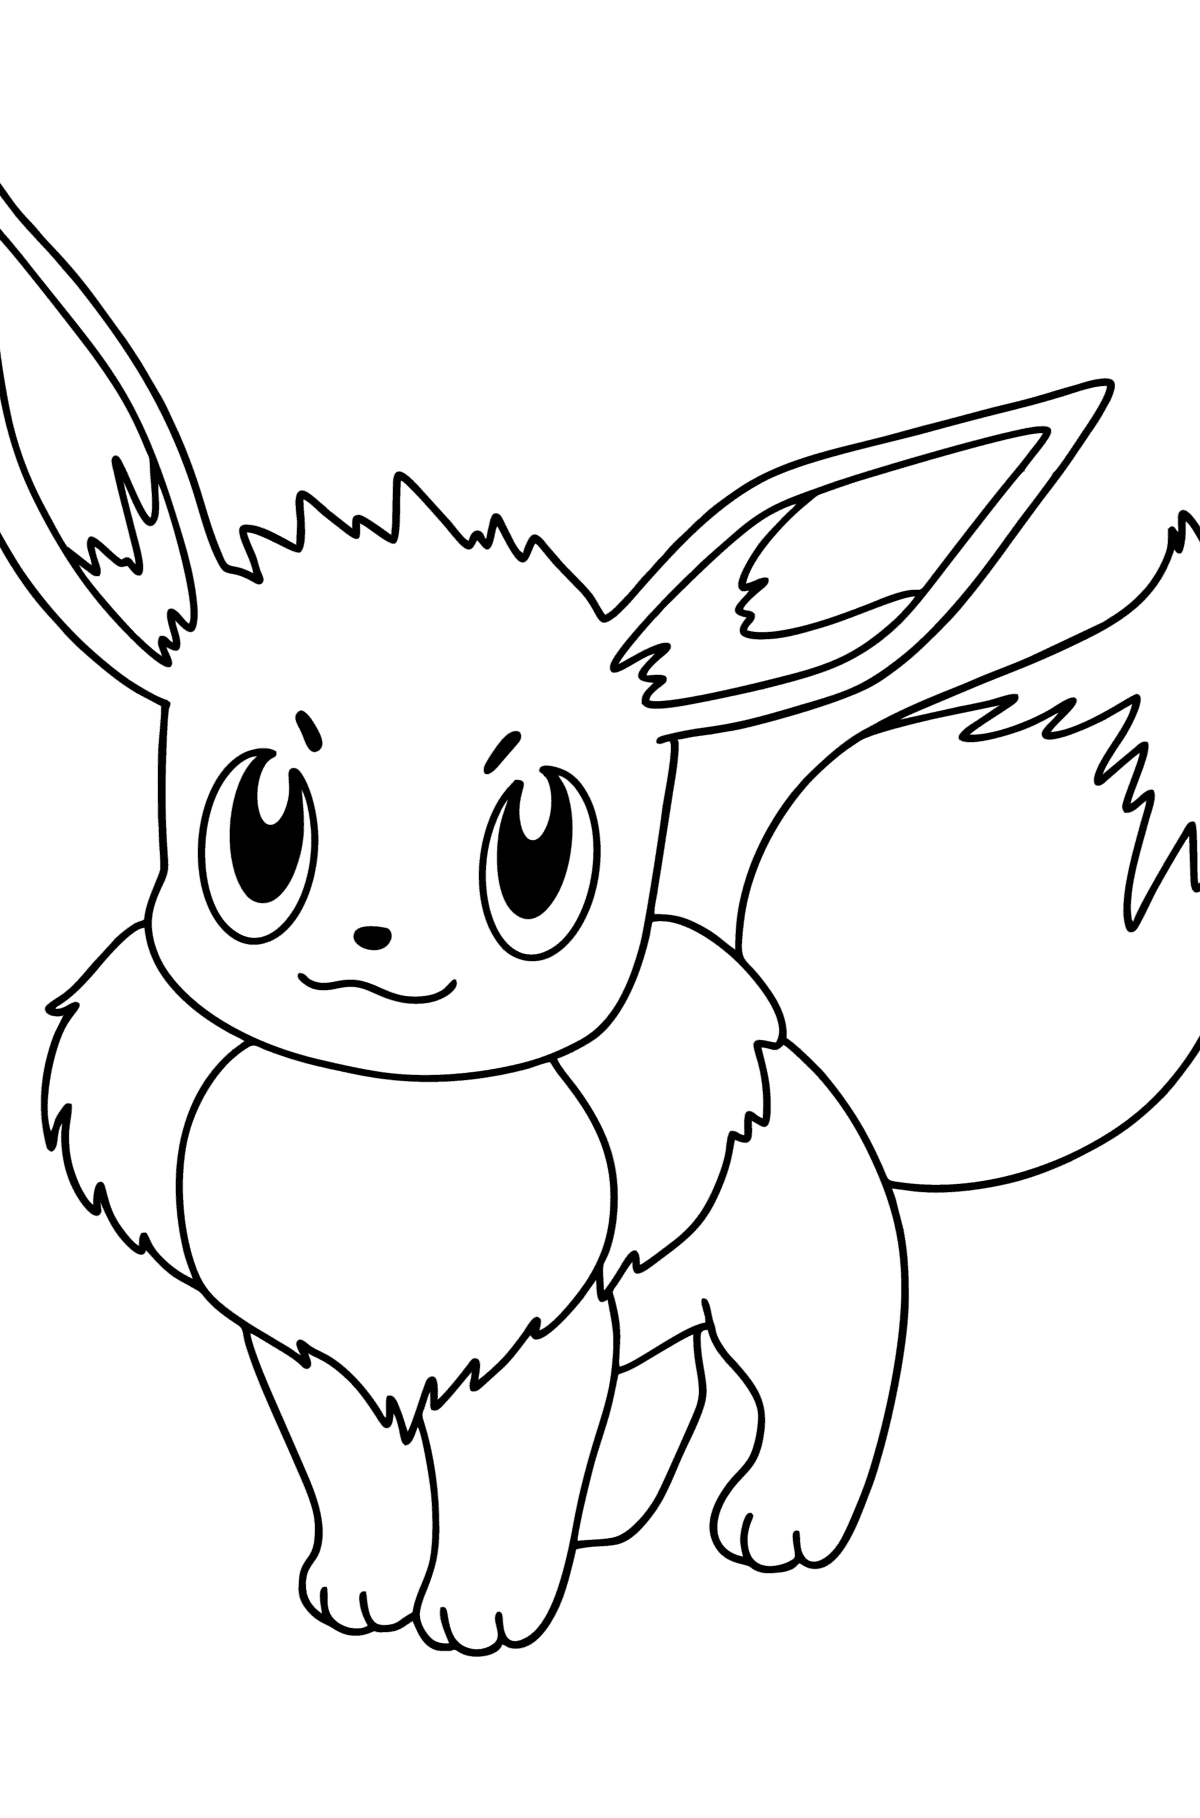 Pokemon Go Eevee coloring page - Coloring Pages for Kids